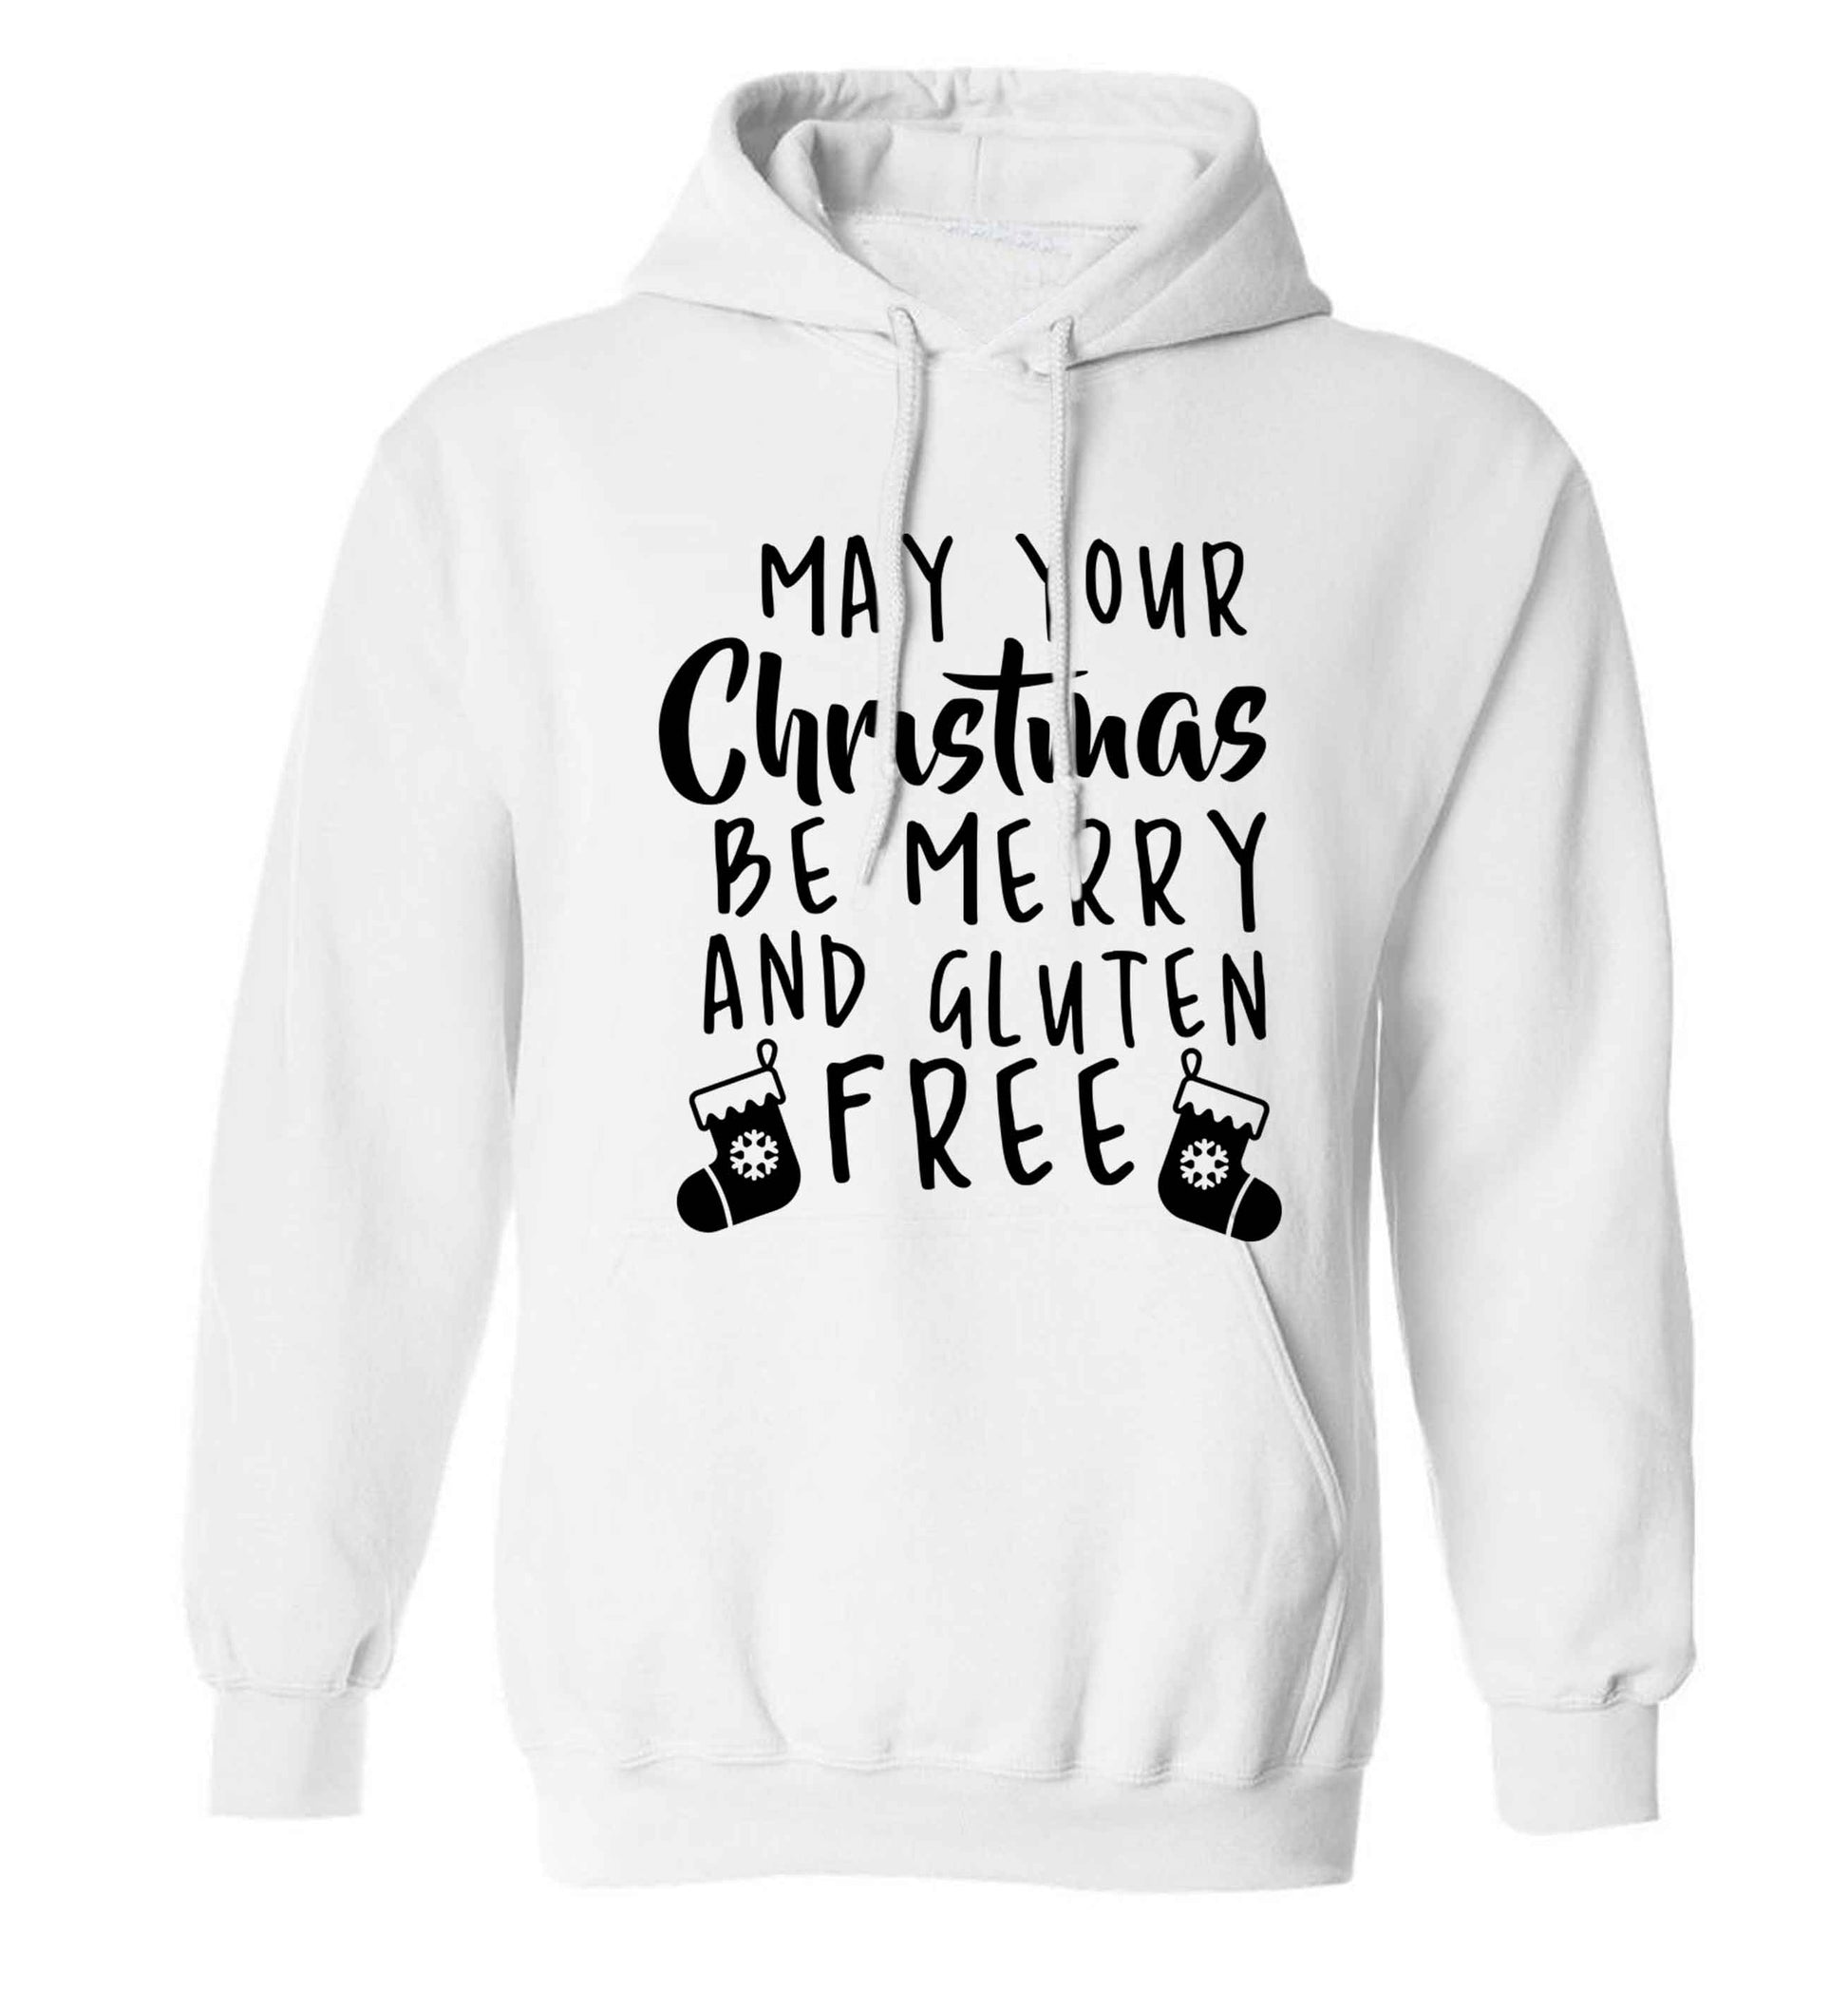 May your Christmas be merry and gluten free adults unisex white hoodie 2XL